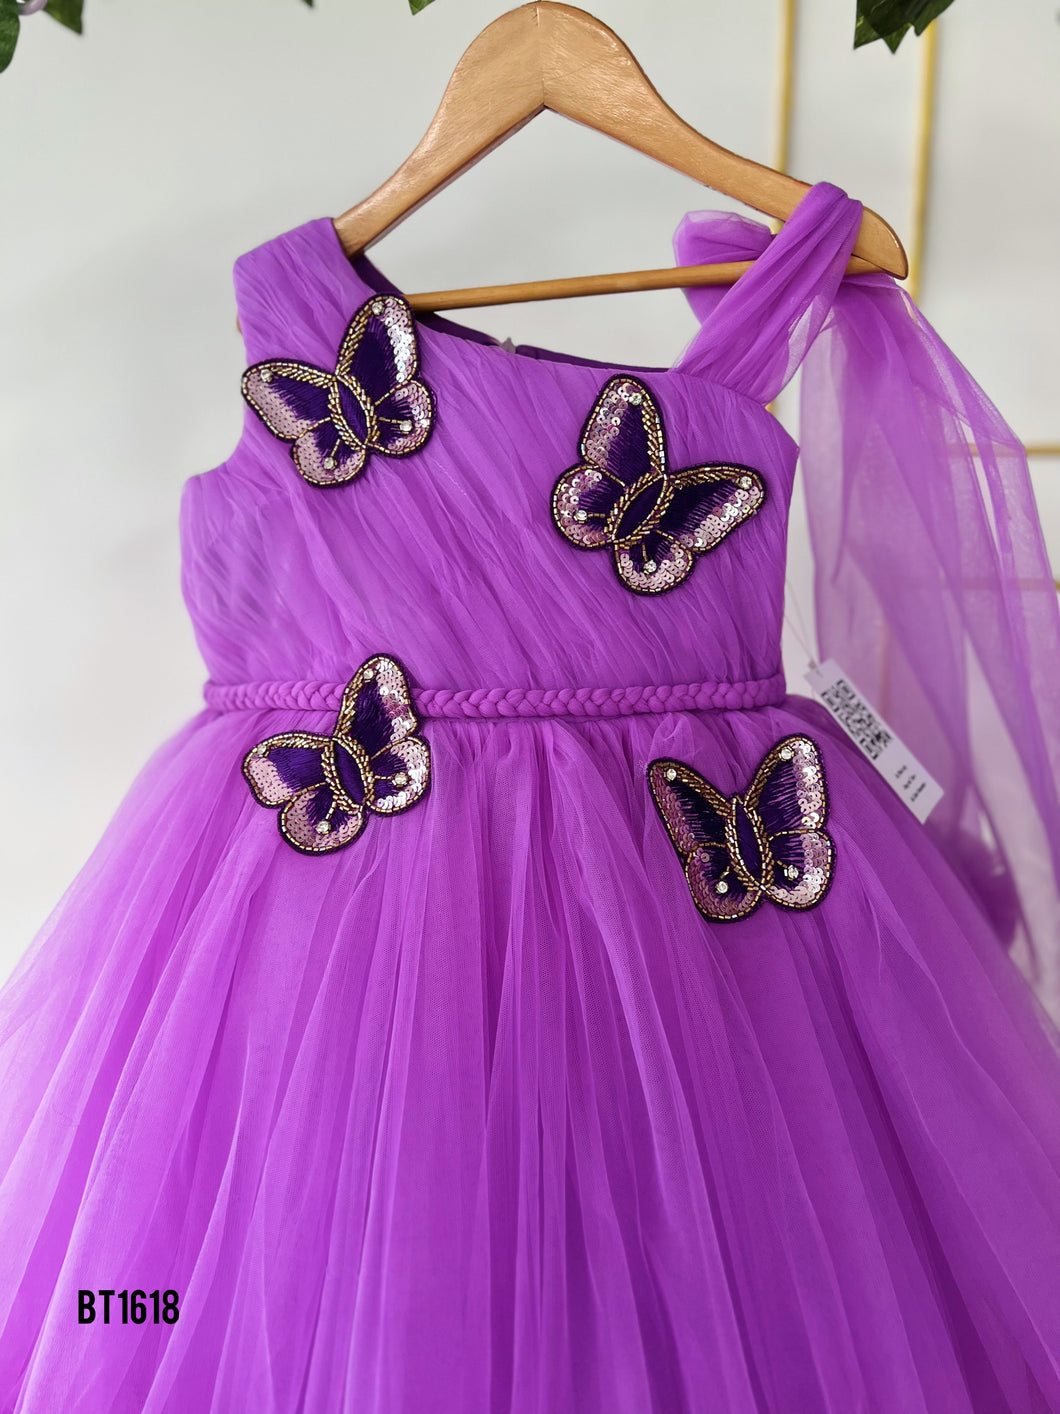 BT1618 Butterfly Theme Birthday Party Wear For Baby Girls